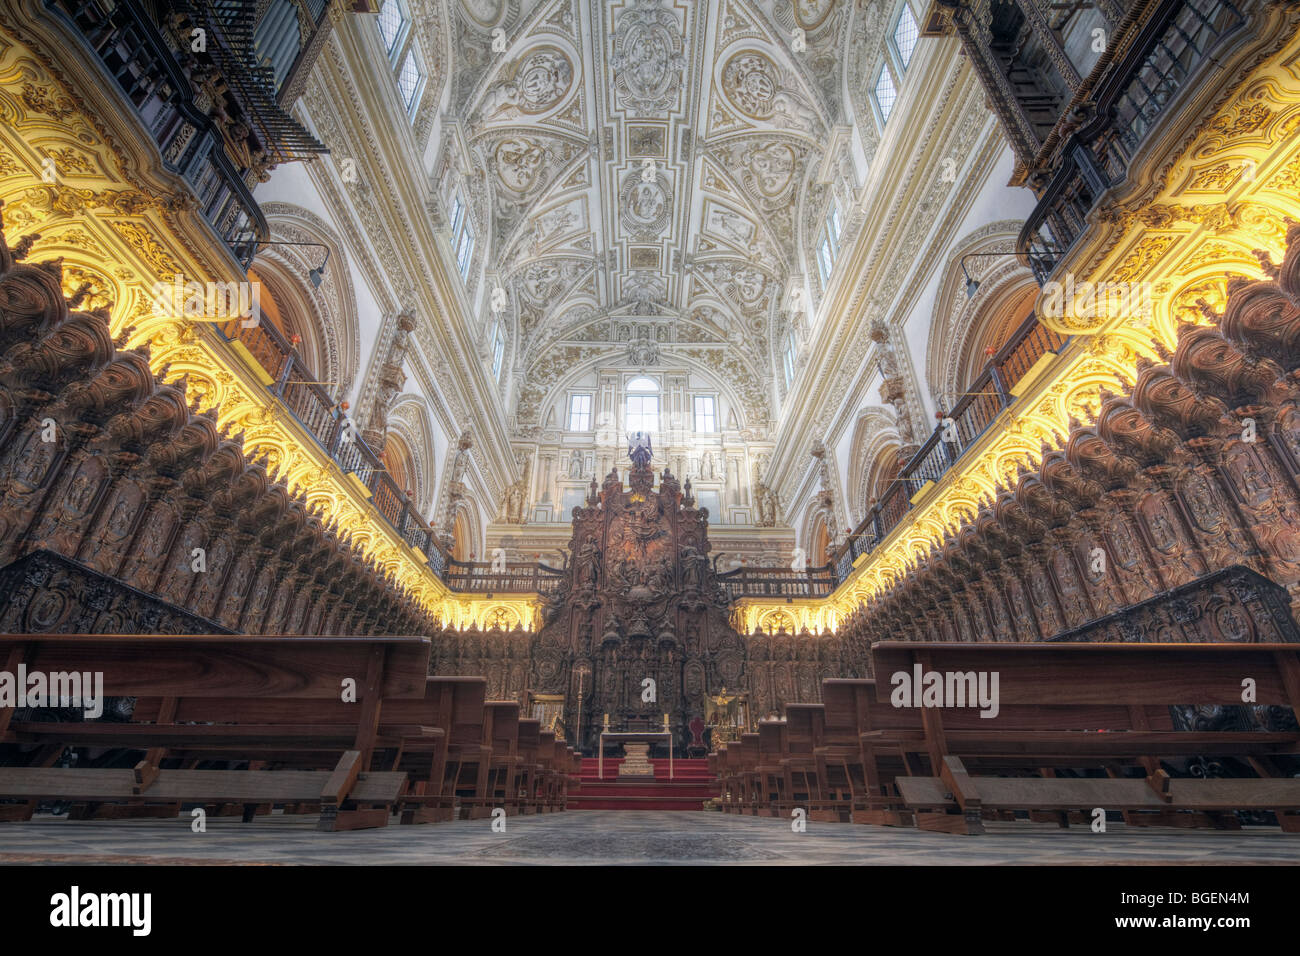 the nave and choir stalls of the Santa Iglesia cathedral, the mosque of Cordoba, Andalusia, Spain Stock Photo